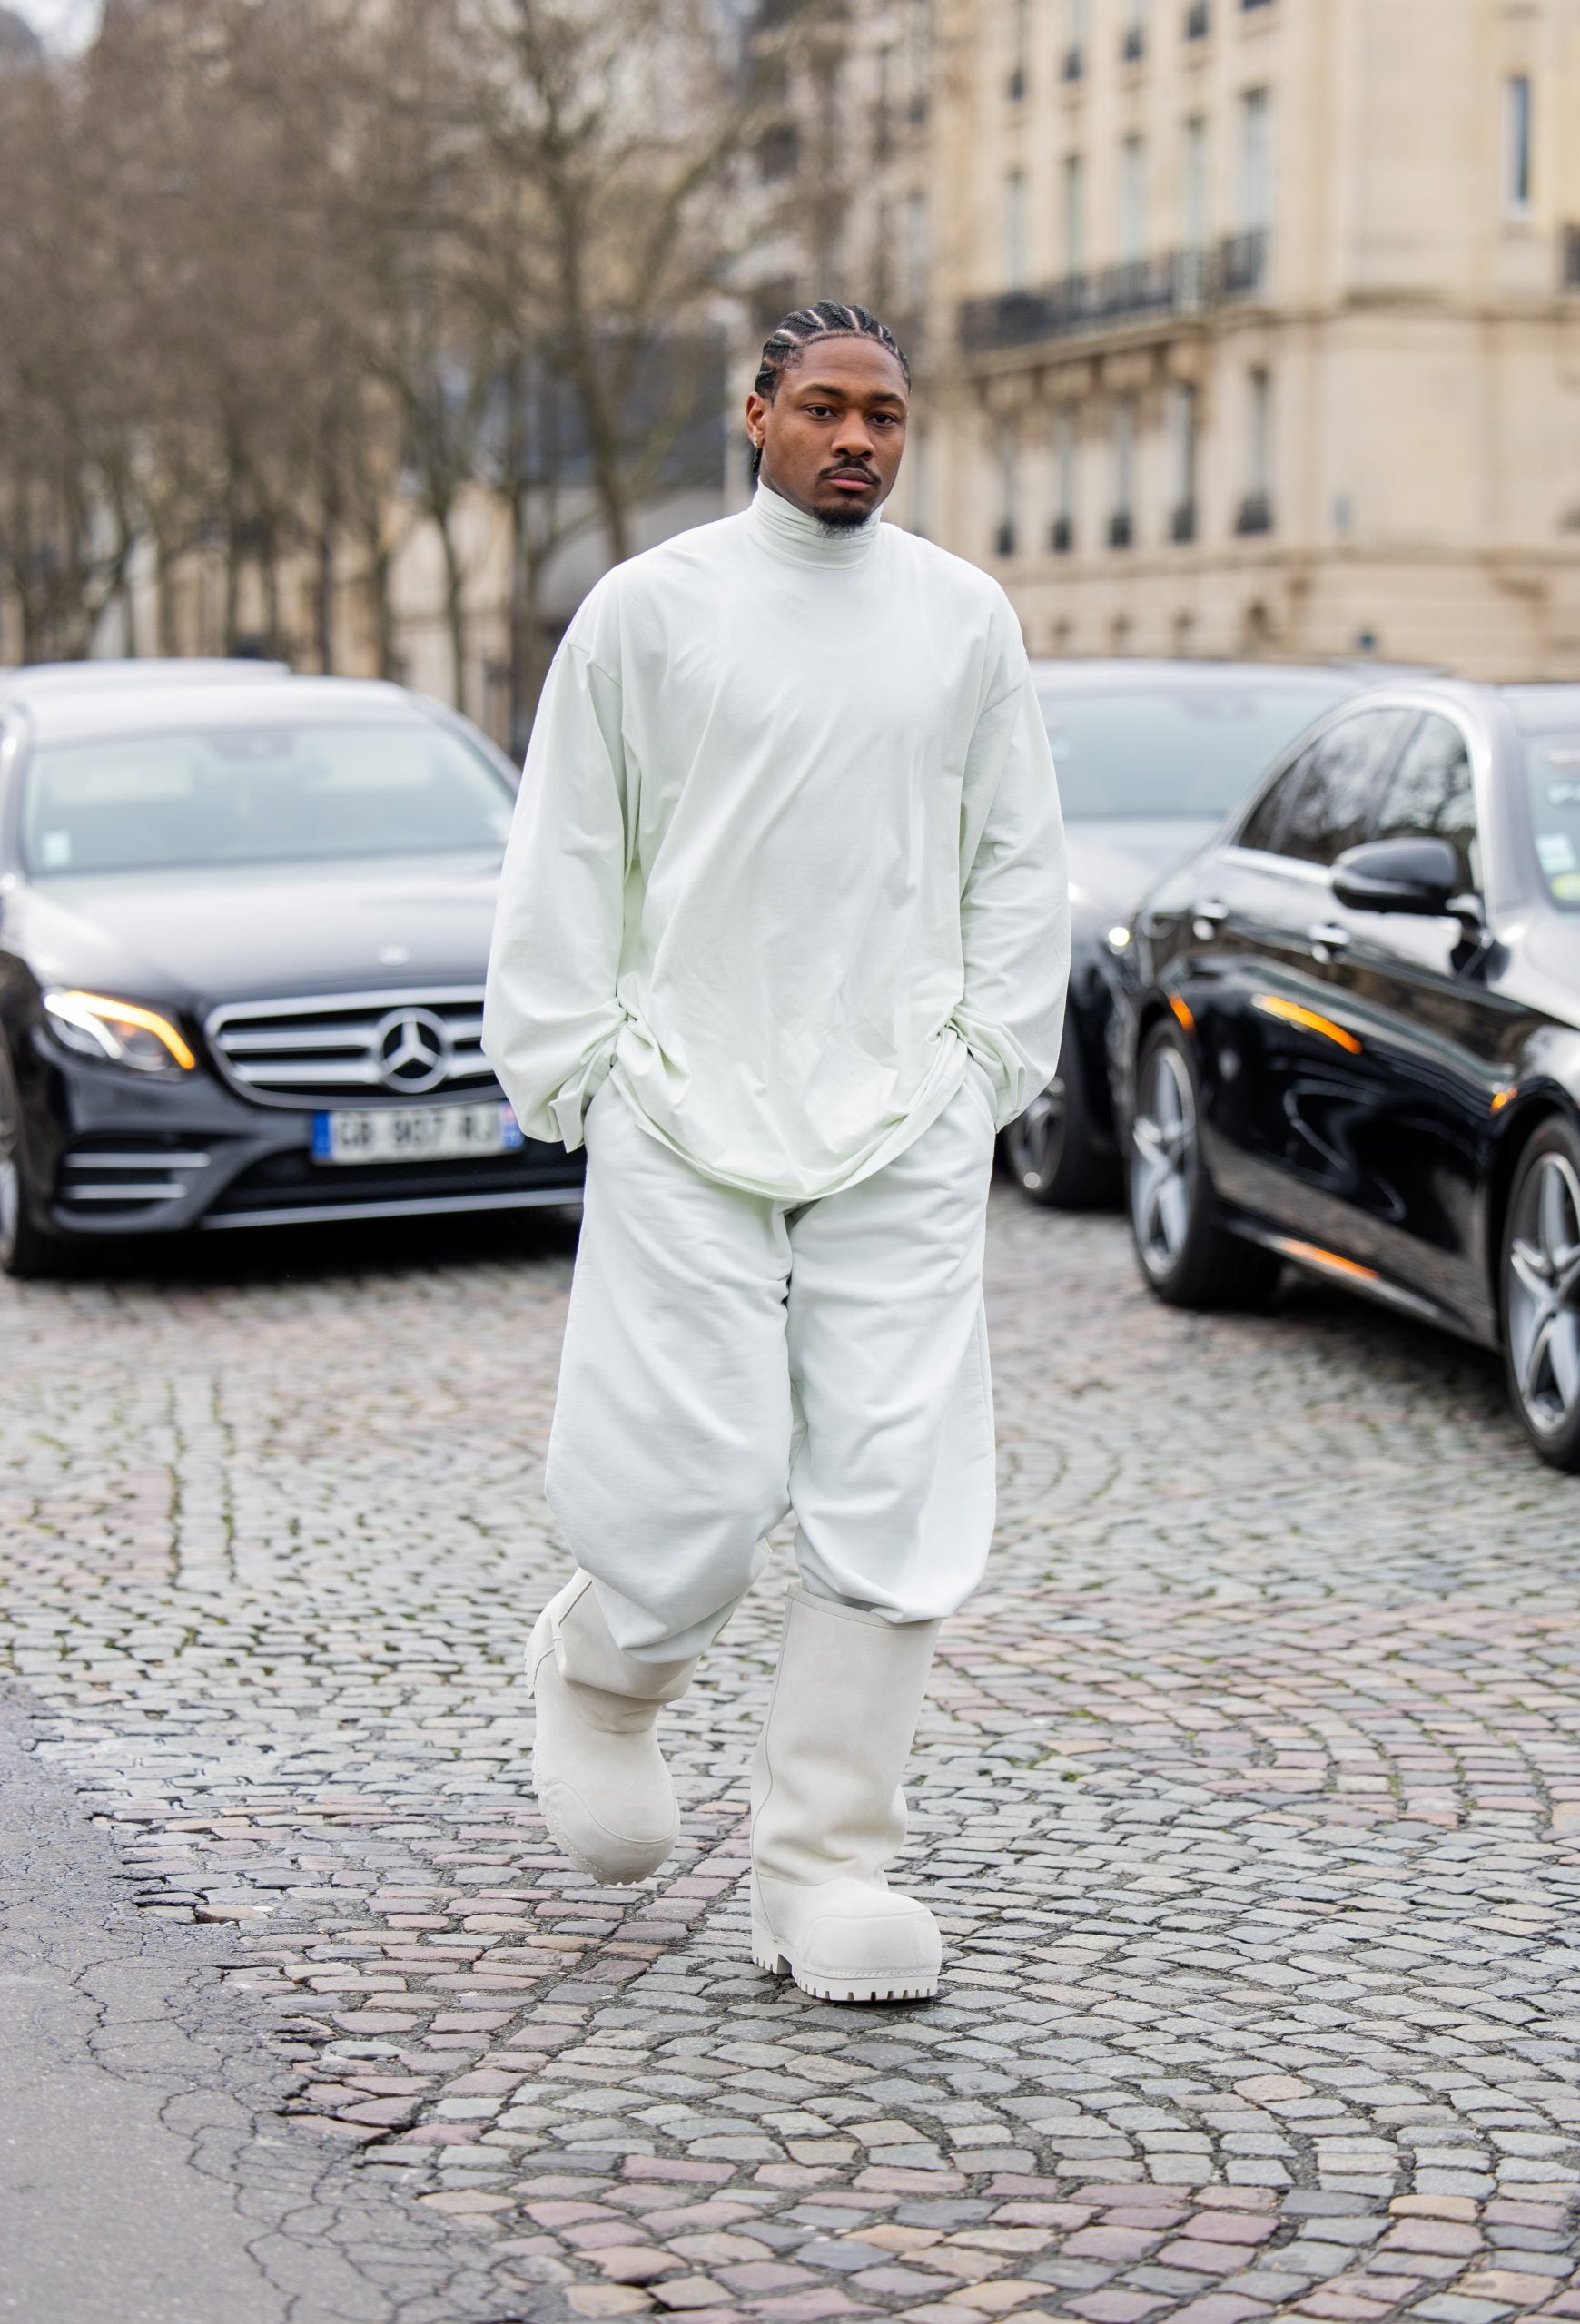 Stefon Diggs In All-White At Paris Fashion Week Is Our Favorite Thing Right Now